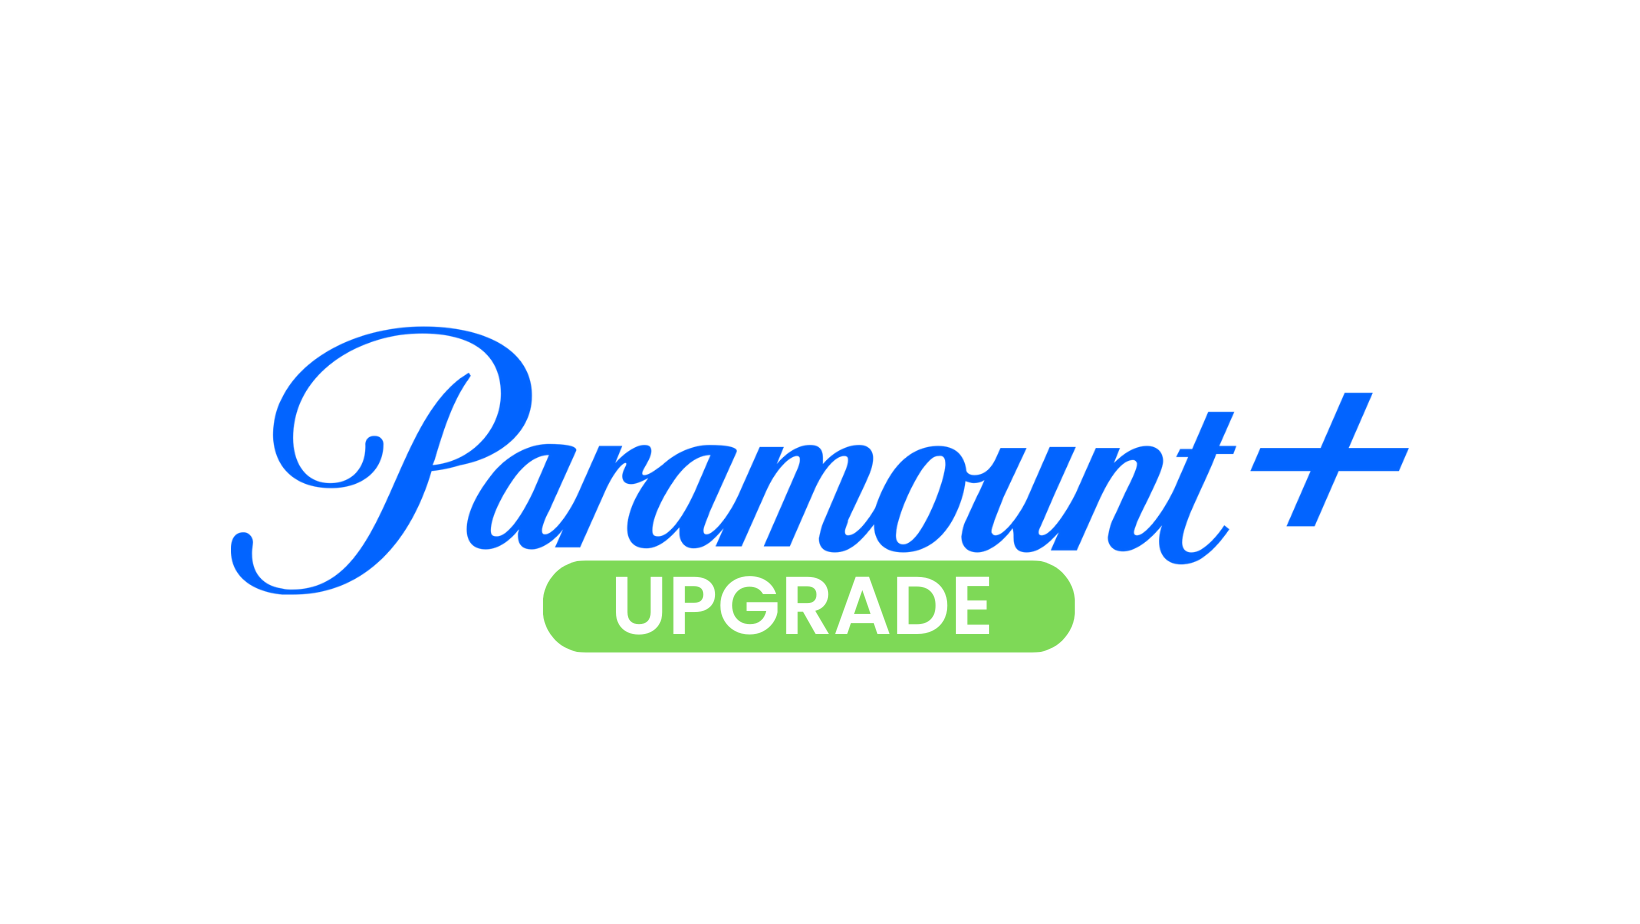 Paramount + No Ads (USA) | 12 Months Upgrade on Your Own Account